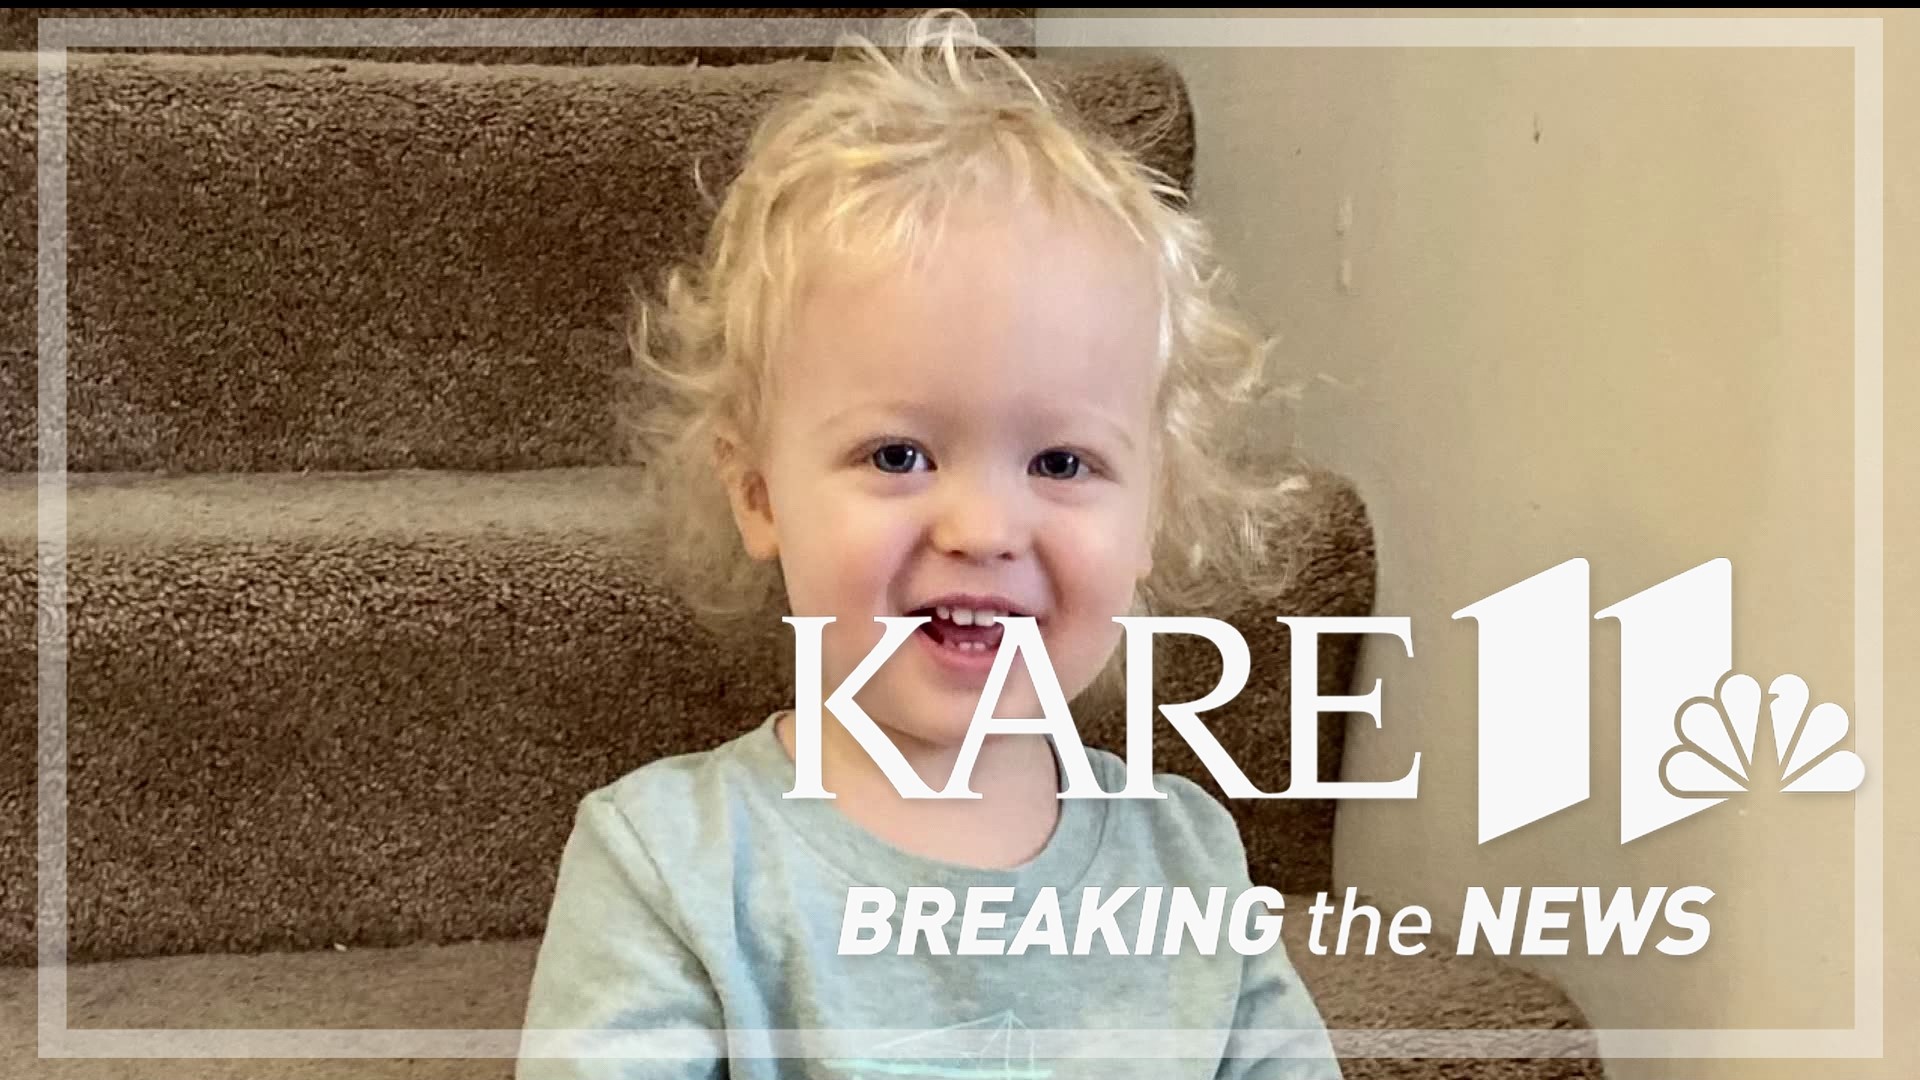 Potential donors are stepping in to help 22-month-old Ari Chambers-Baltz fight a rare autoimmune disorder that will require a stem cell or bone marrow transplant.